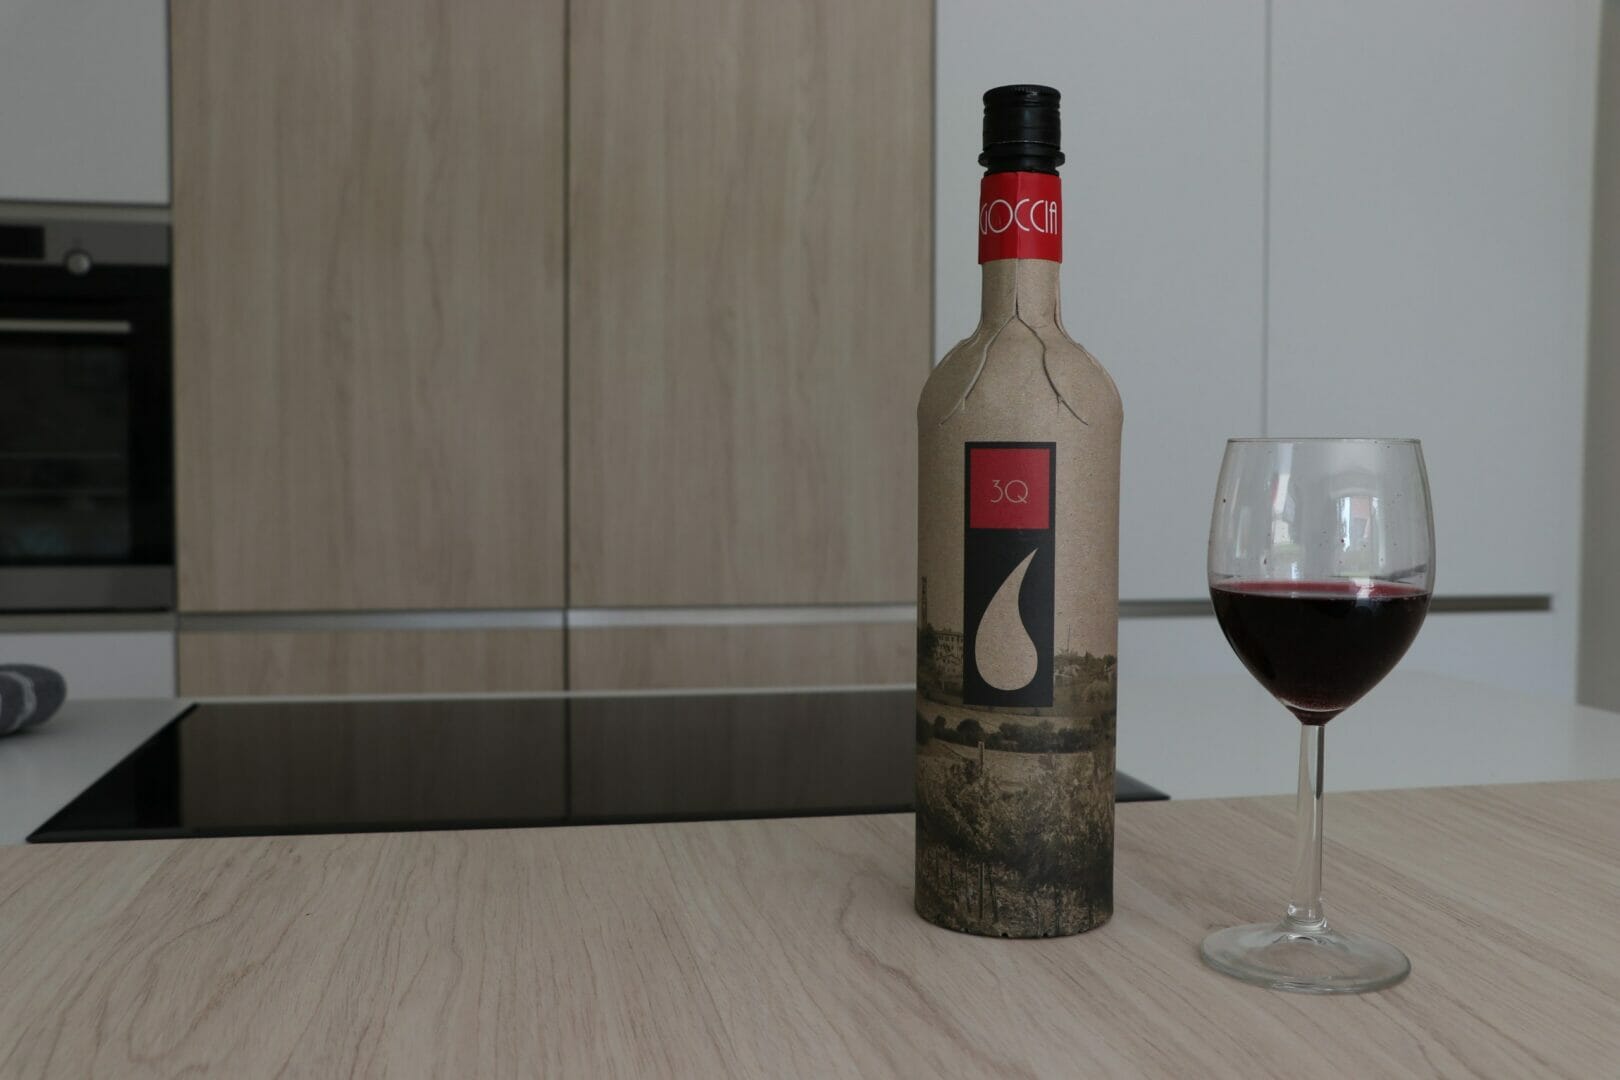 Cantina Goccia Launches Wine in World’s First Paper Bottle